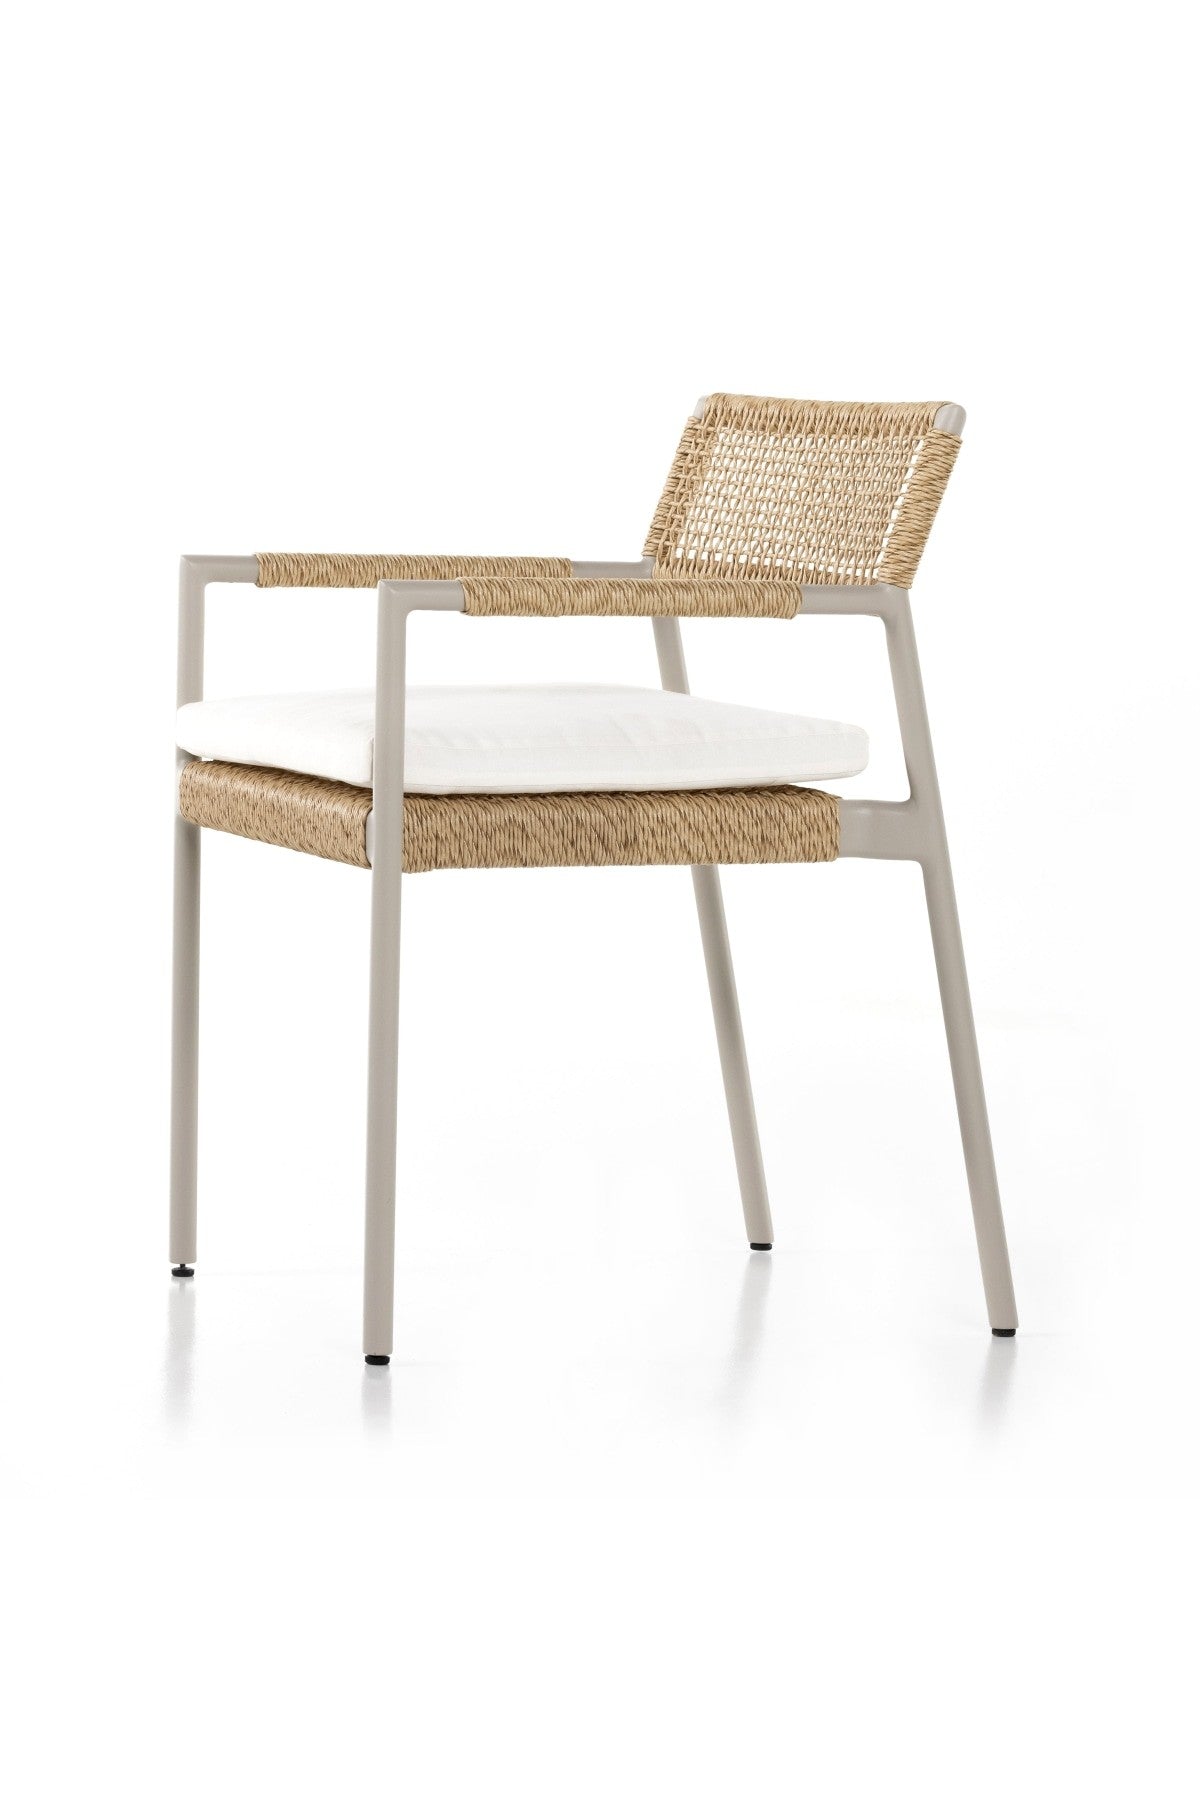 Ortino Outdoor Dining Chair